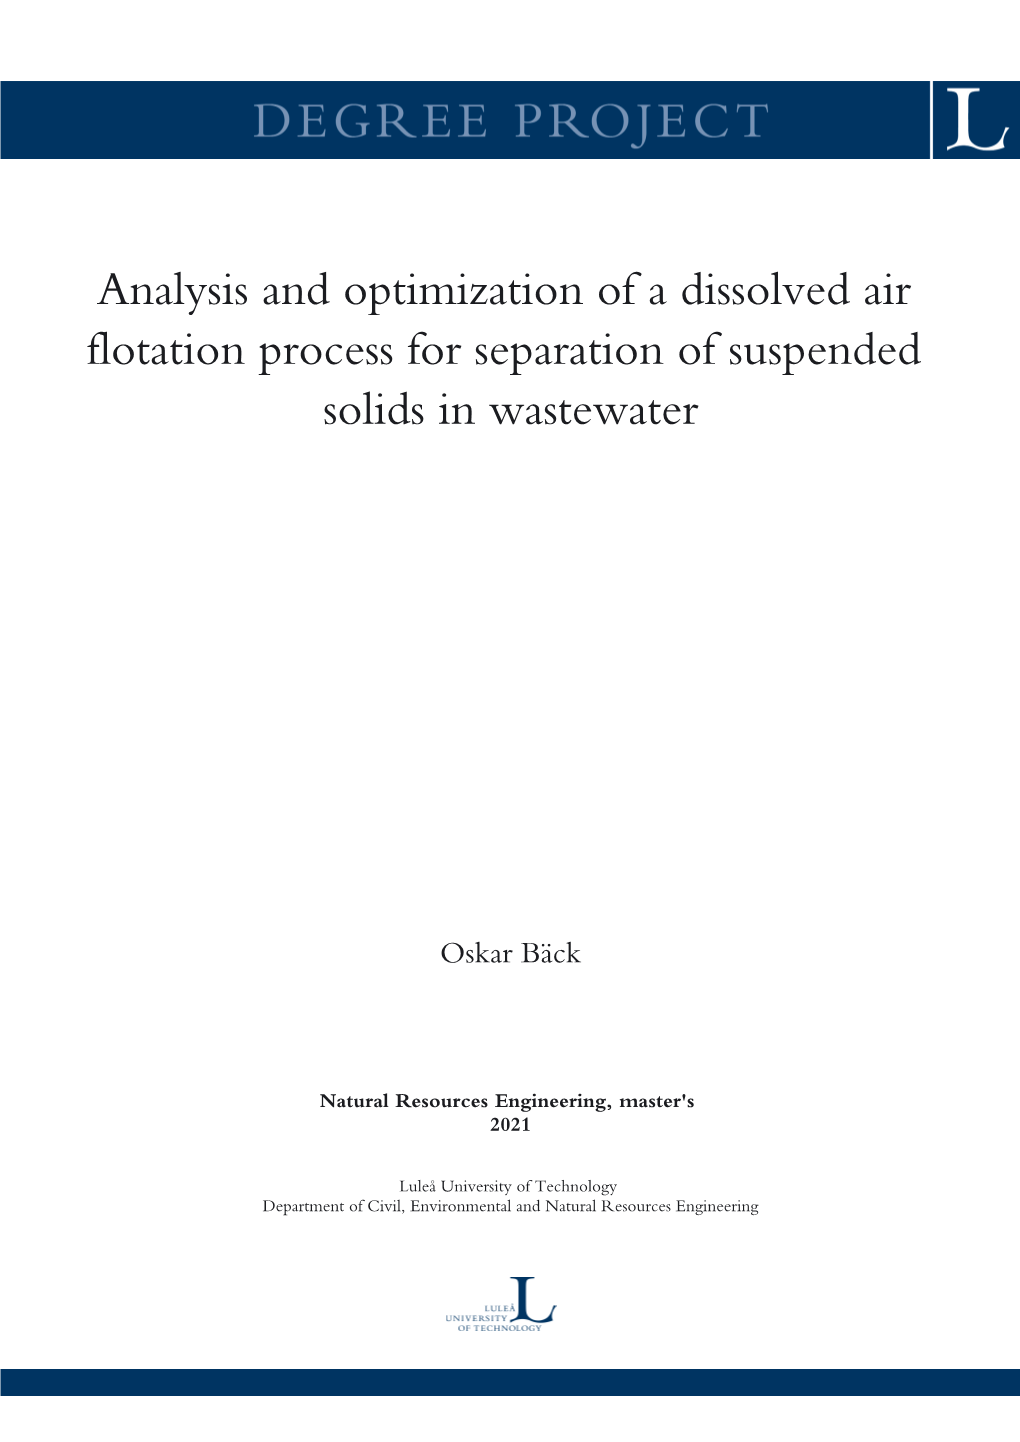 Analysis and Optimization of a Dissolved Air Flotation Process for Separation of Suspended Solids in Wastewater